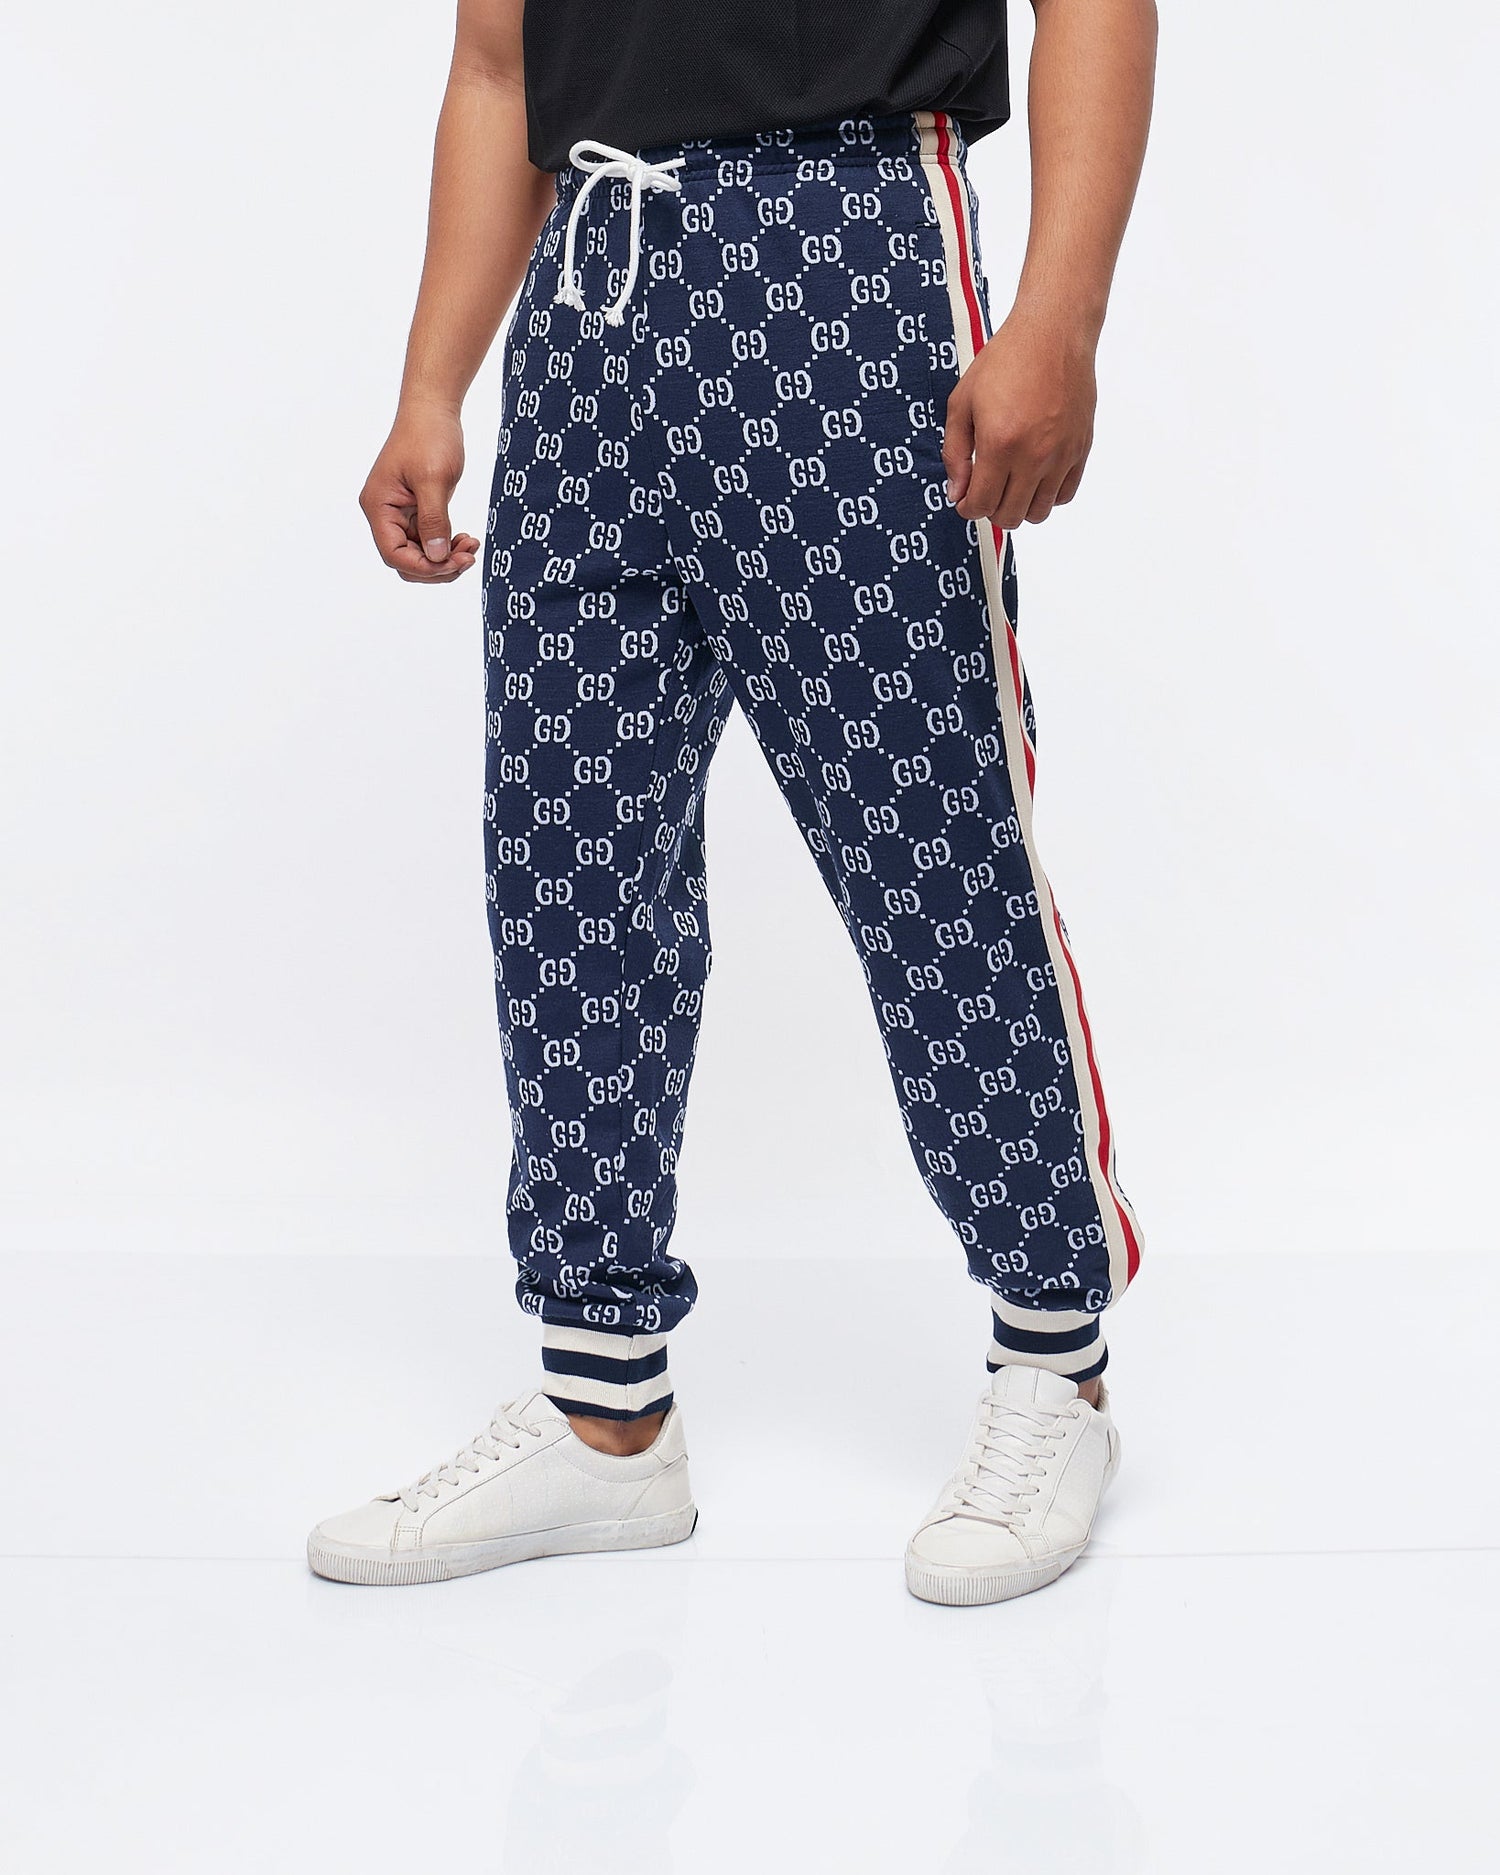 MOI OUTFIT-GG Monogram Over Printed Men Joggers 35.90